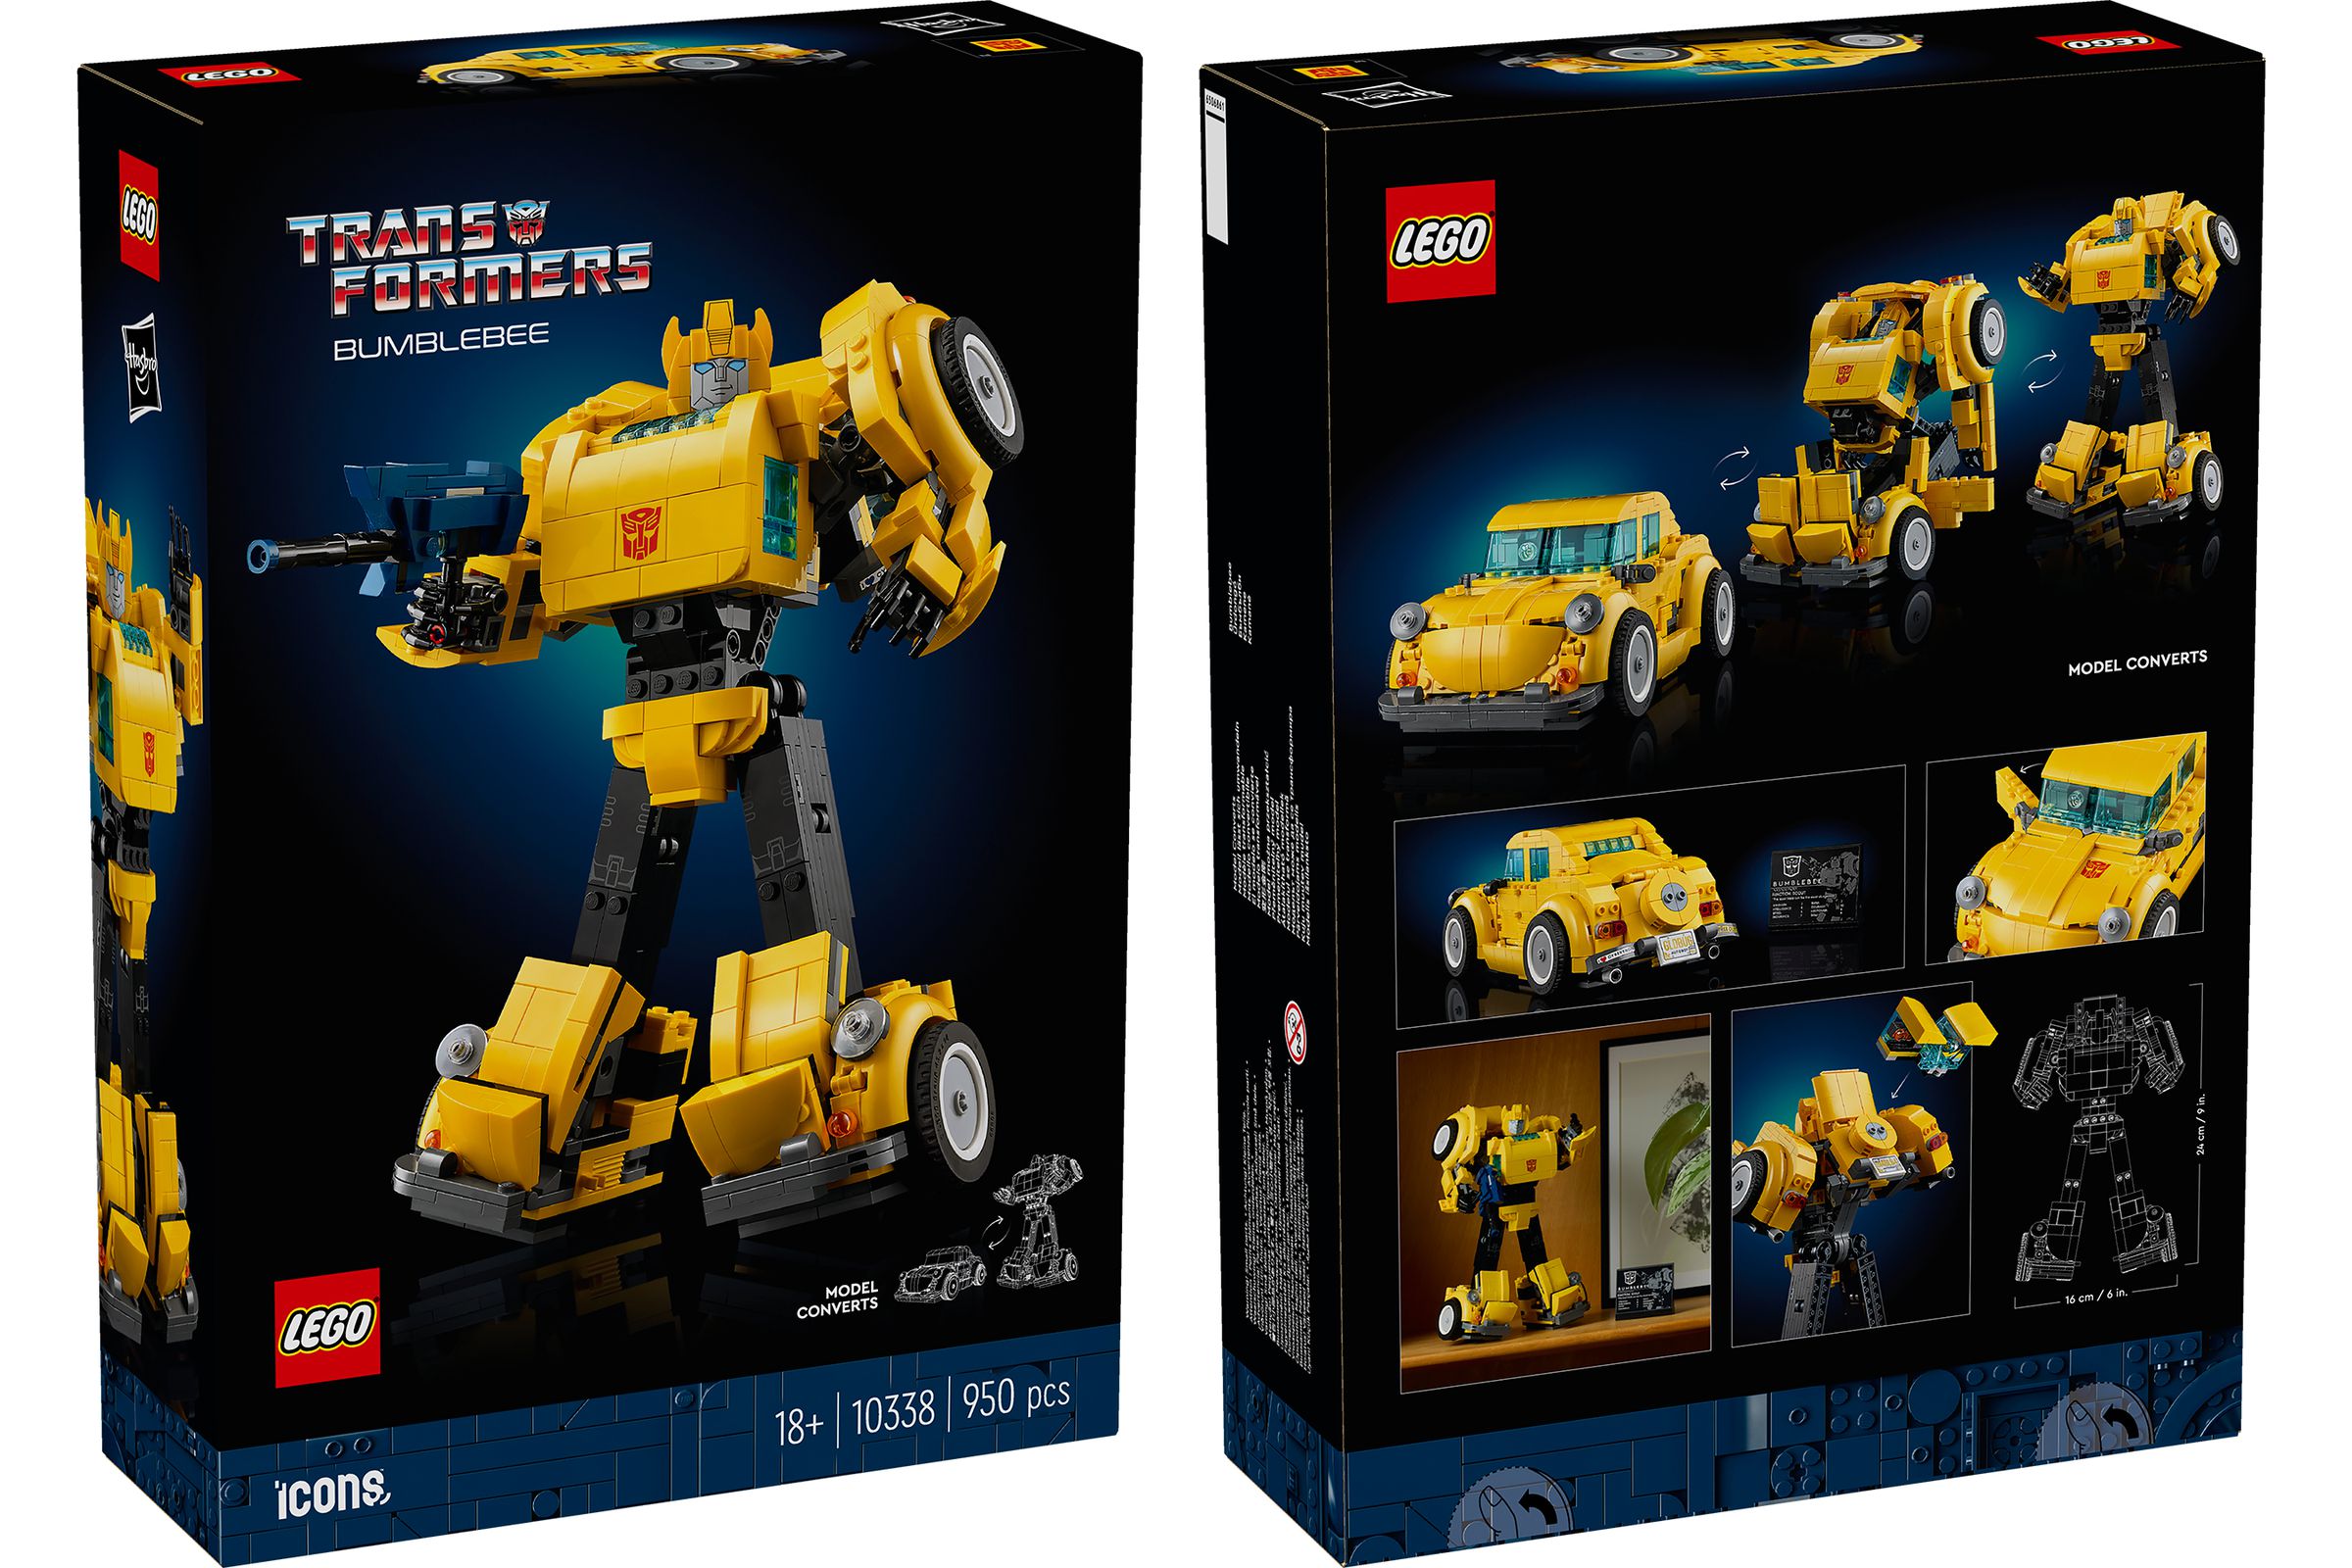 The front and back of the Lego Bumblebee set’s packaging.